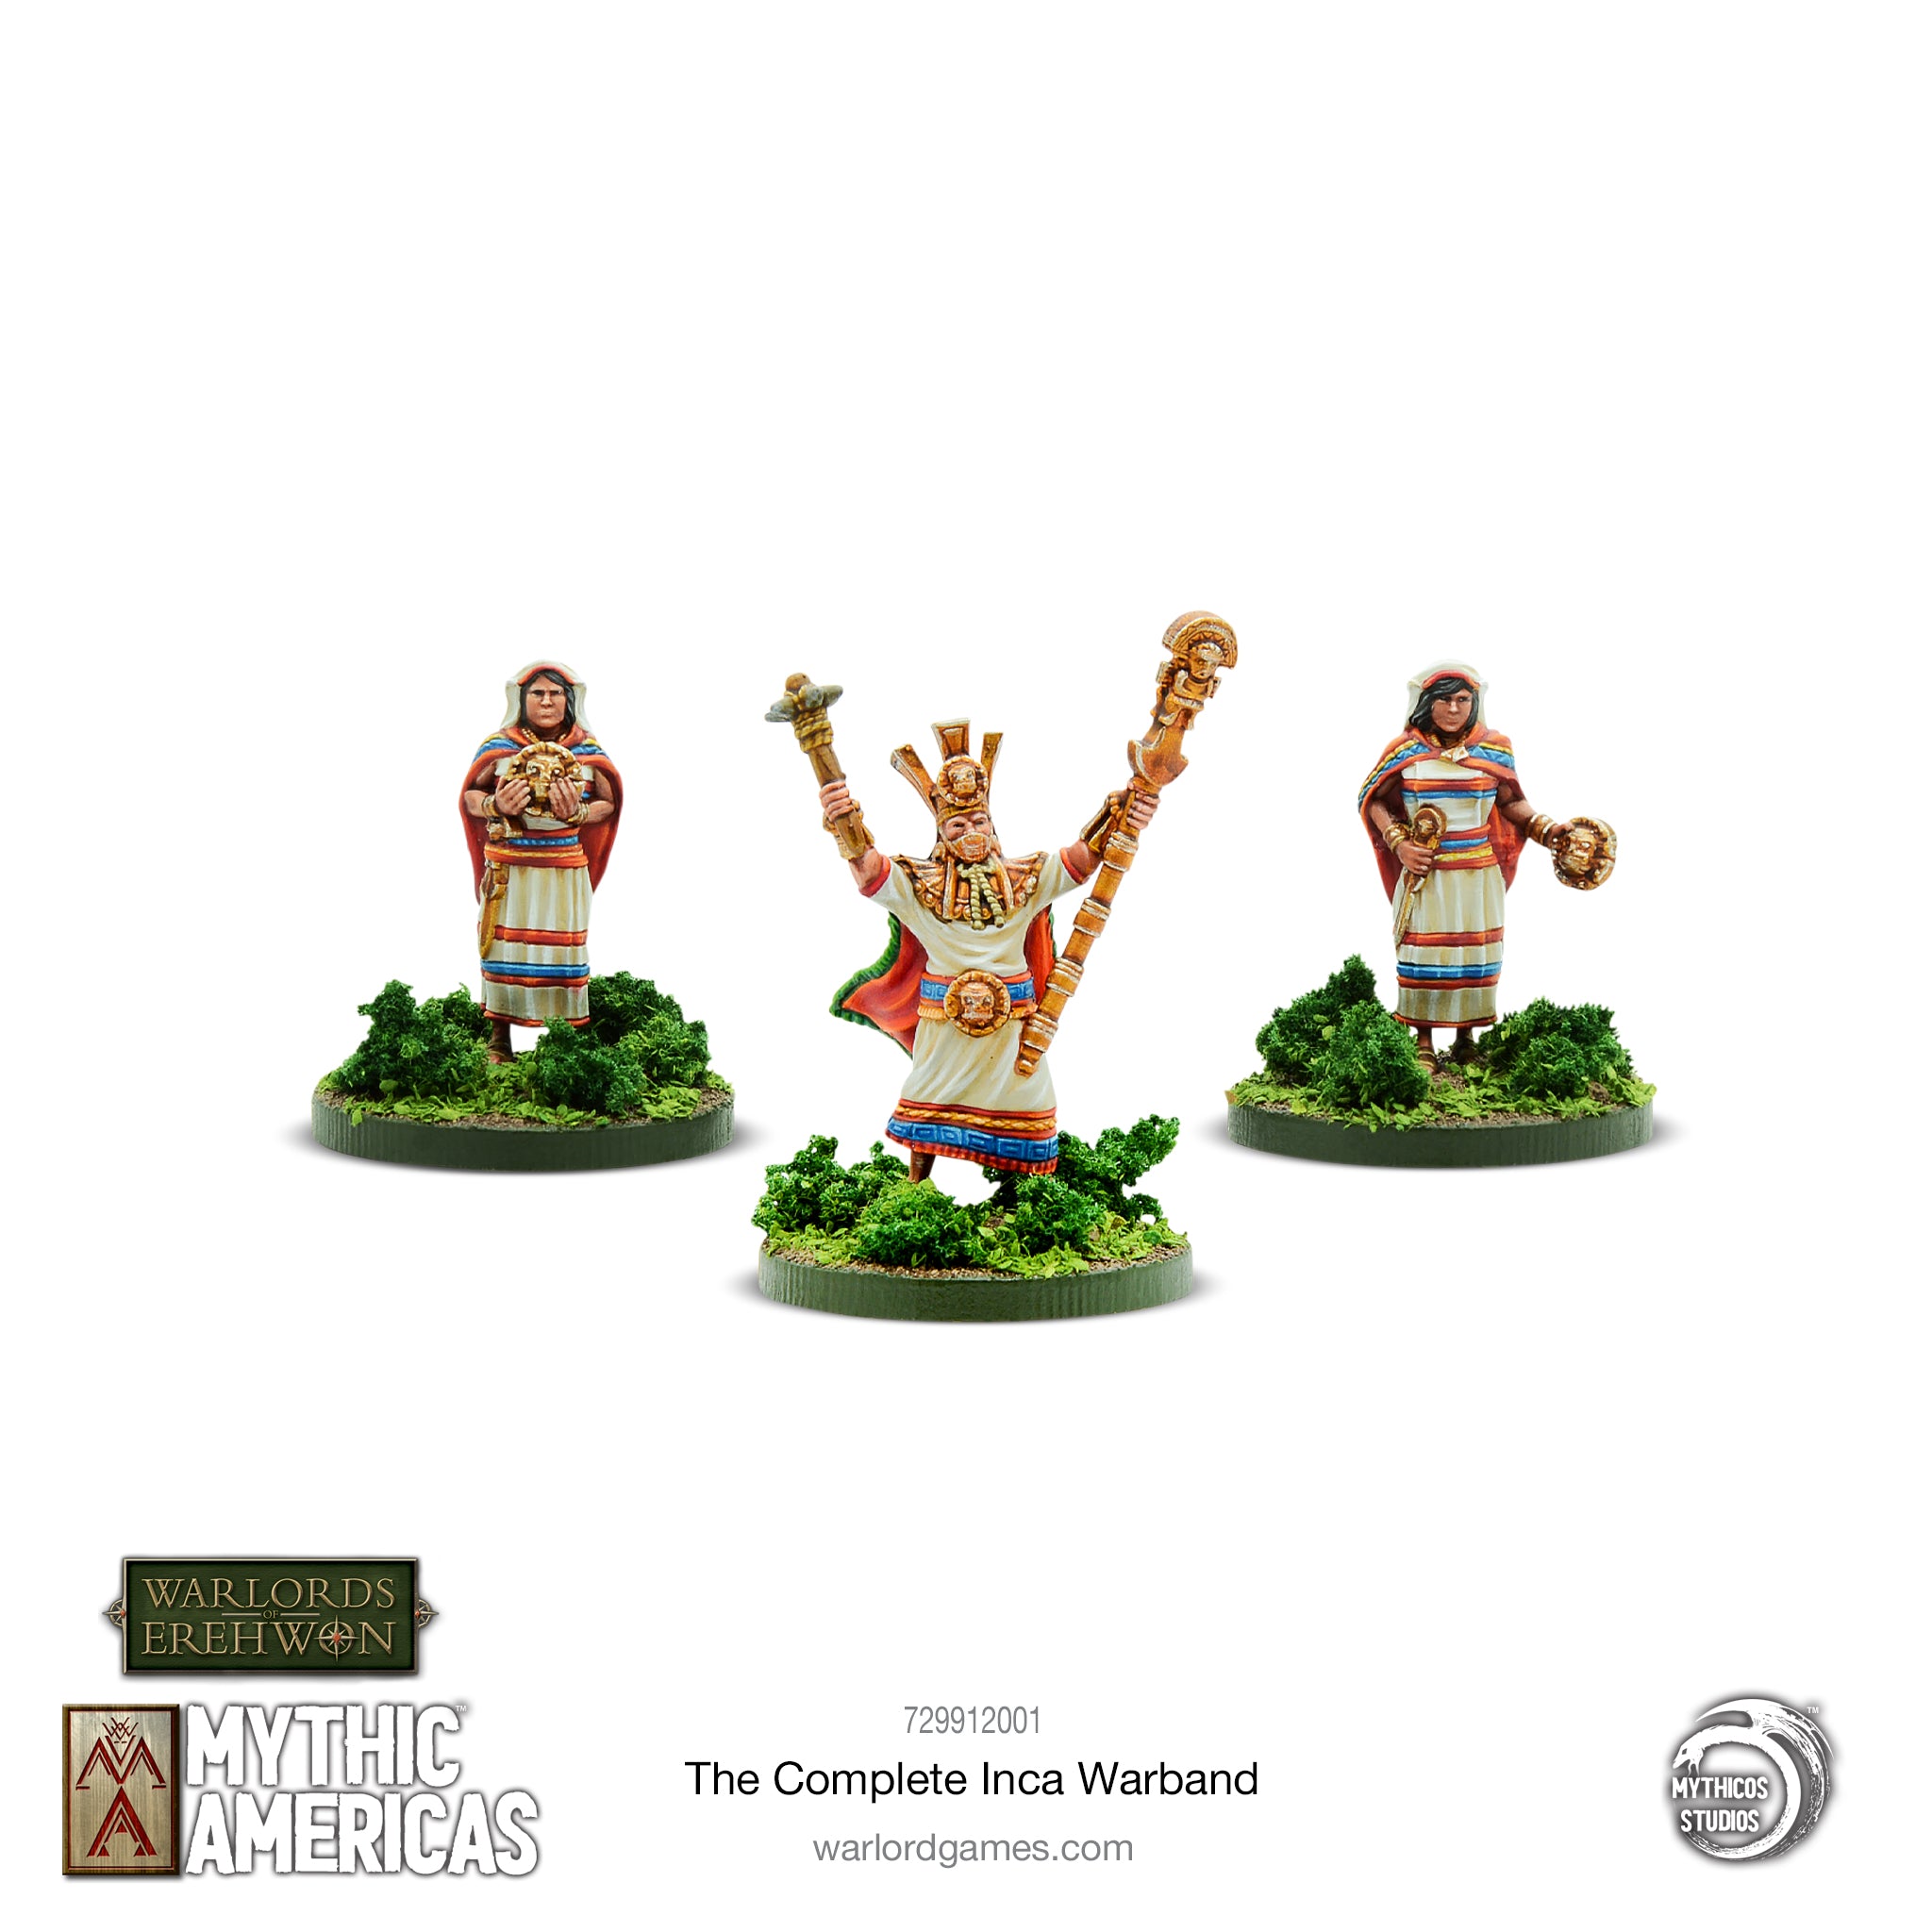 The Complete Inca Warband